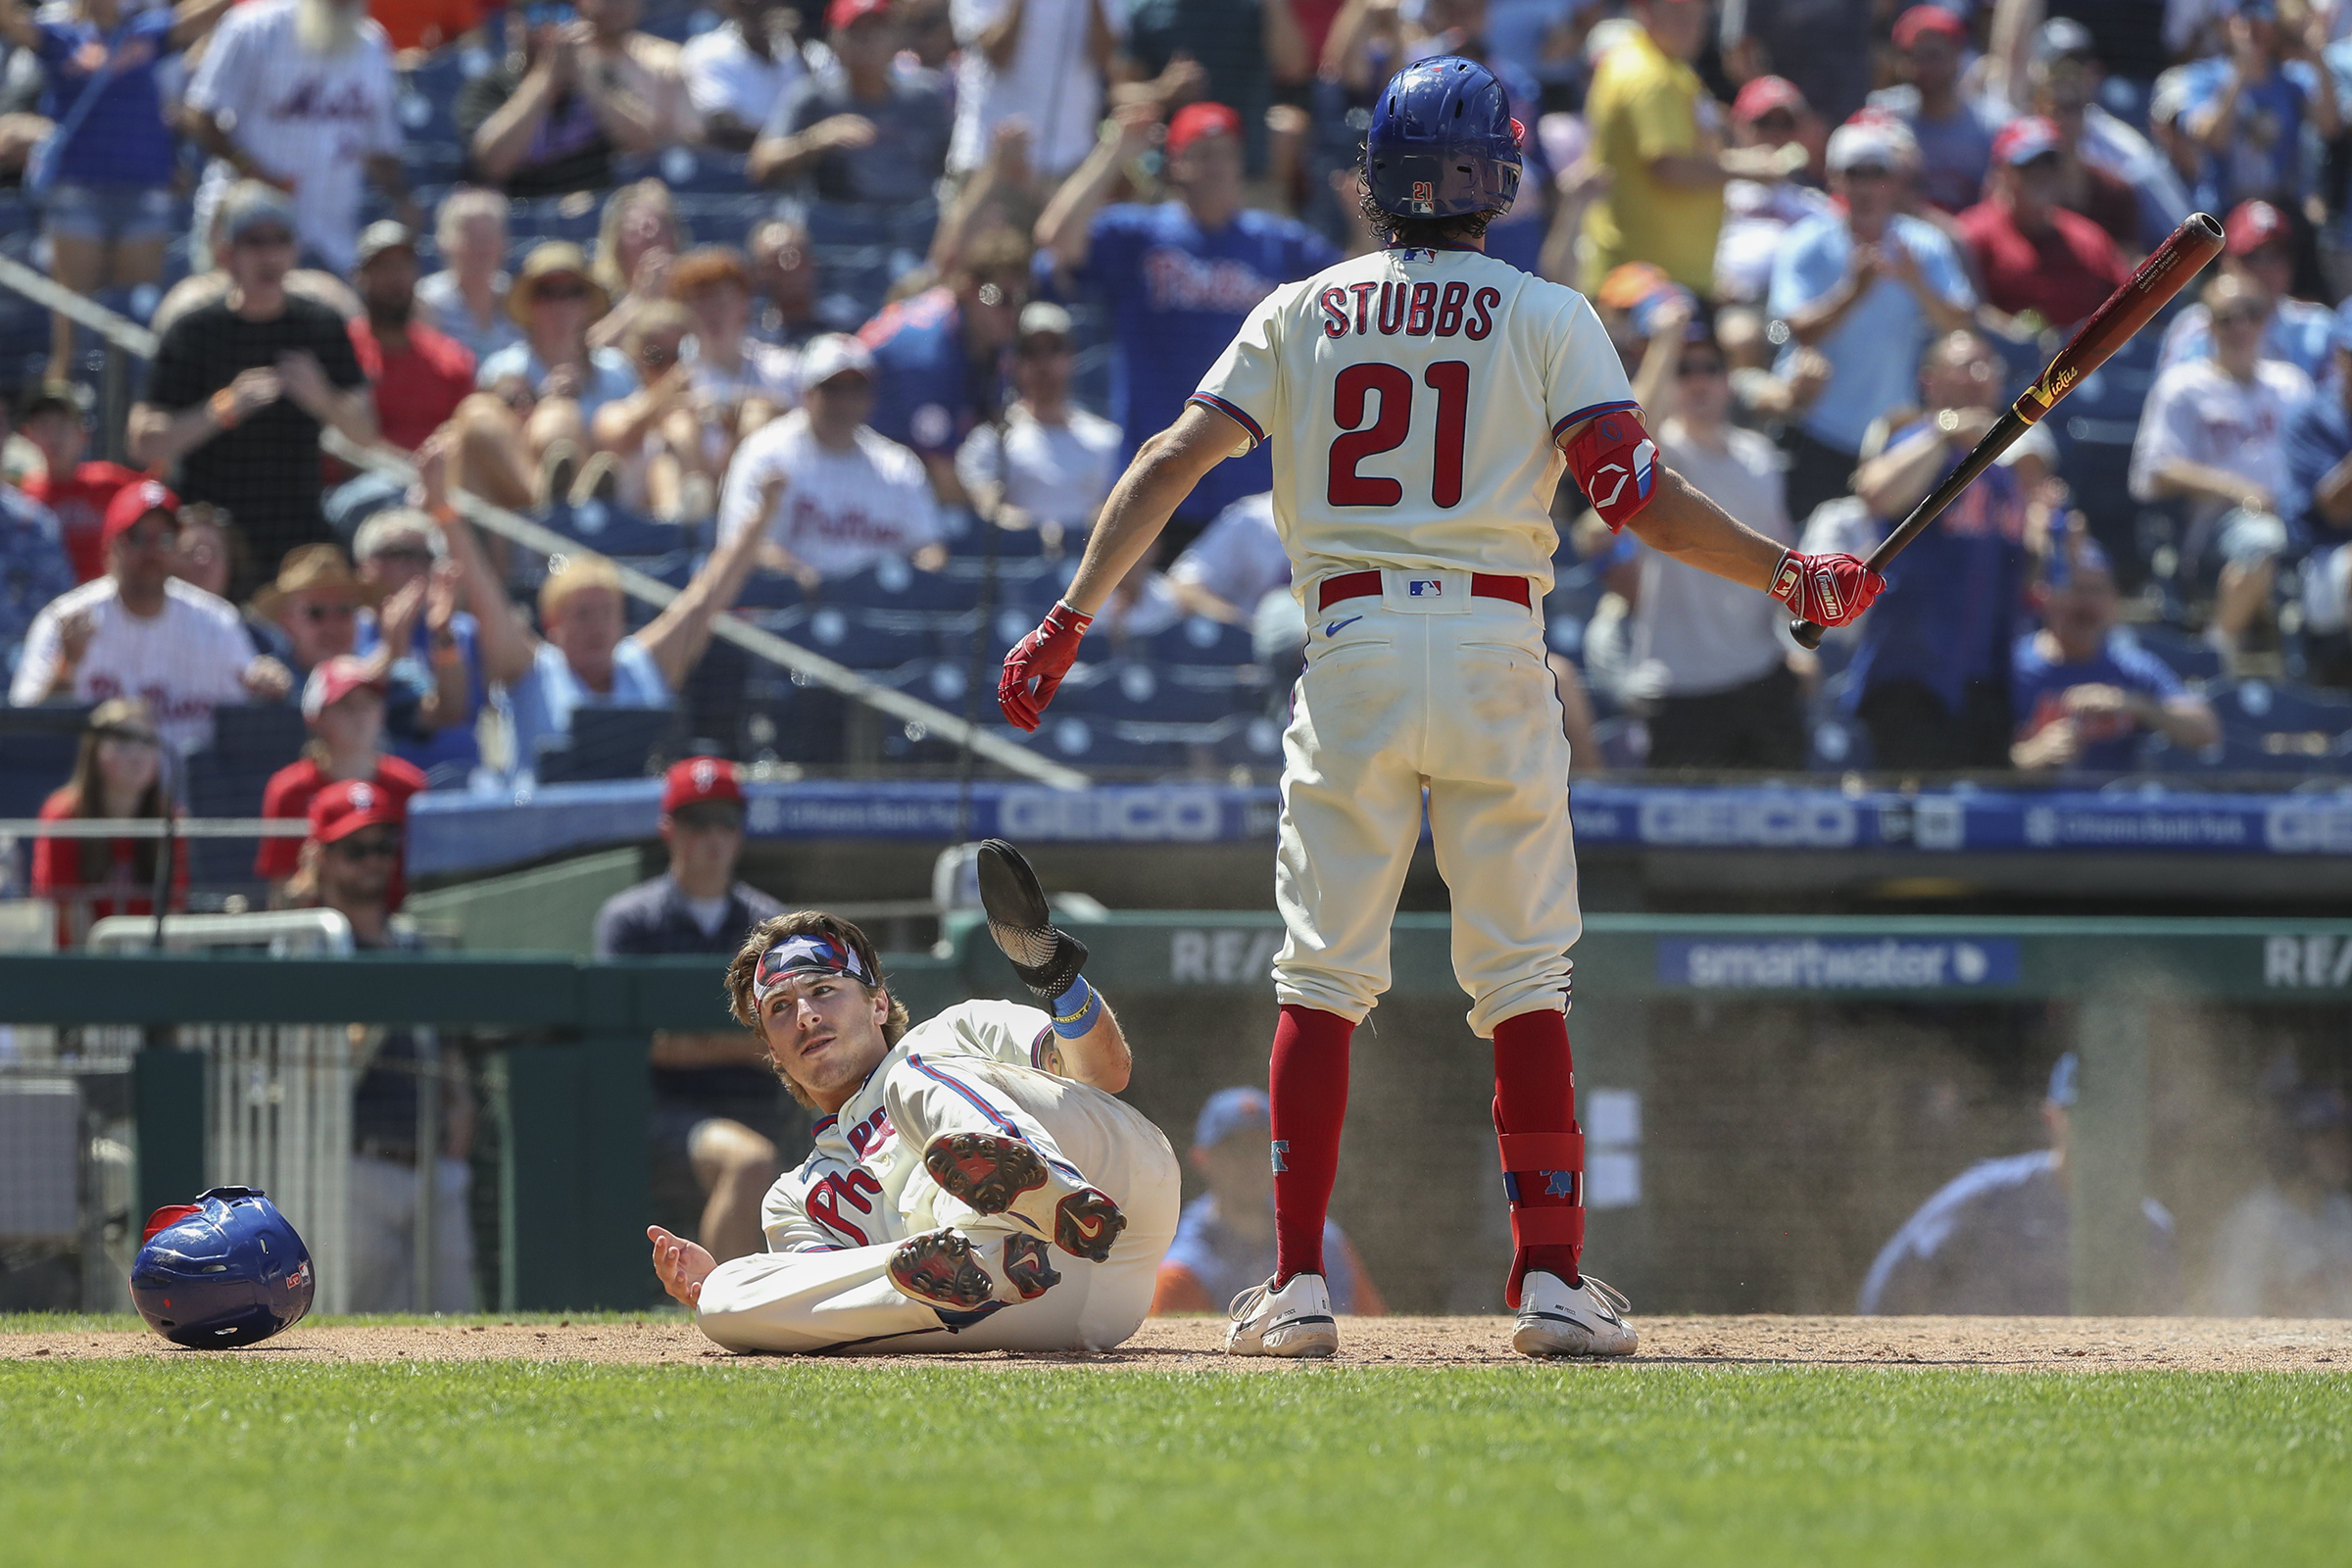 Phillies' starter can't get through fourth inning, just like counterpart  Jacob deGrom